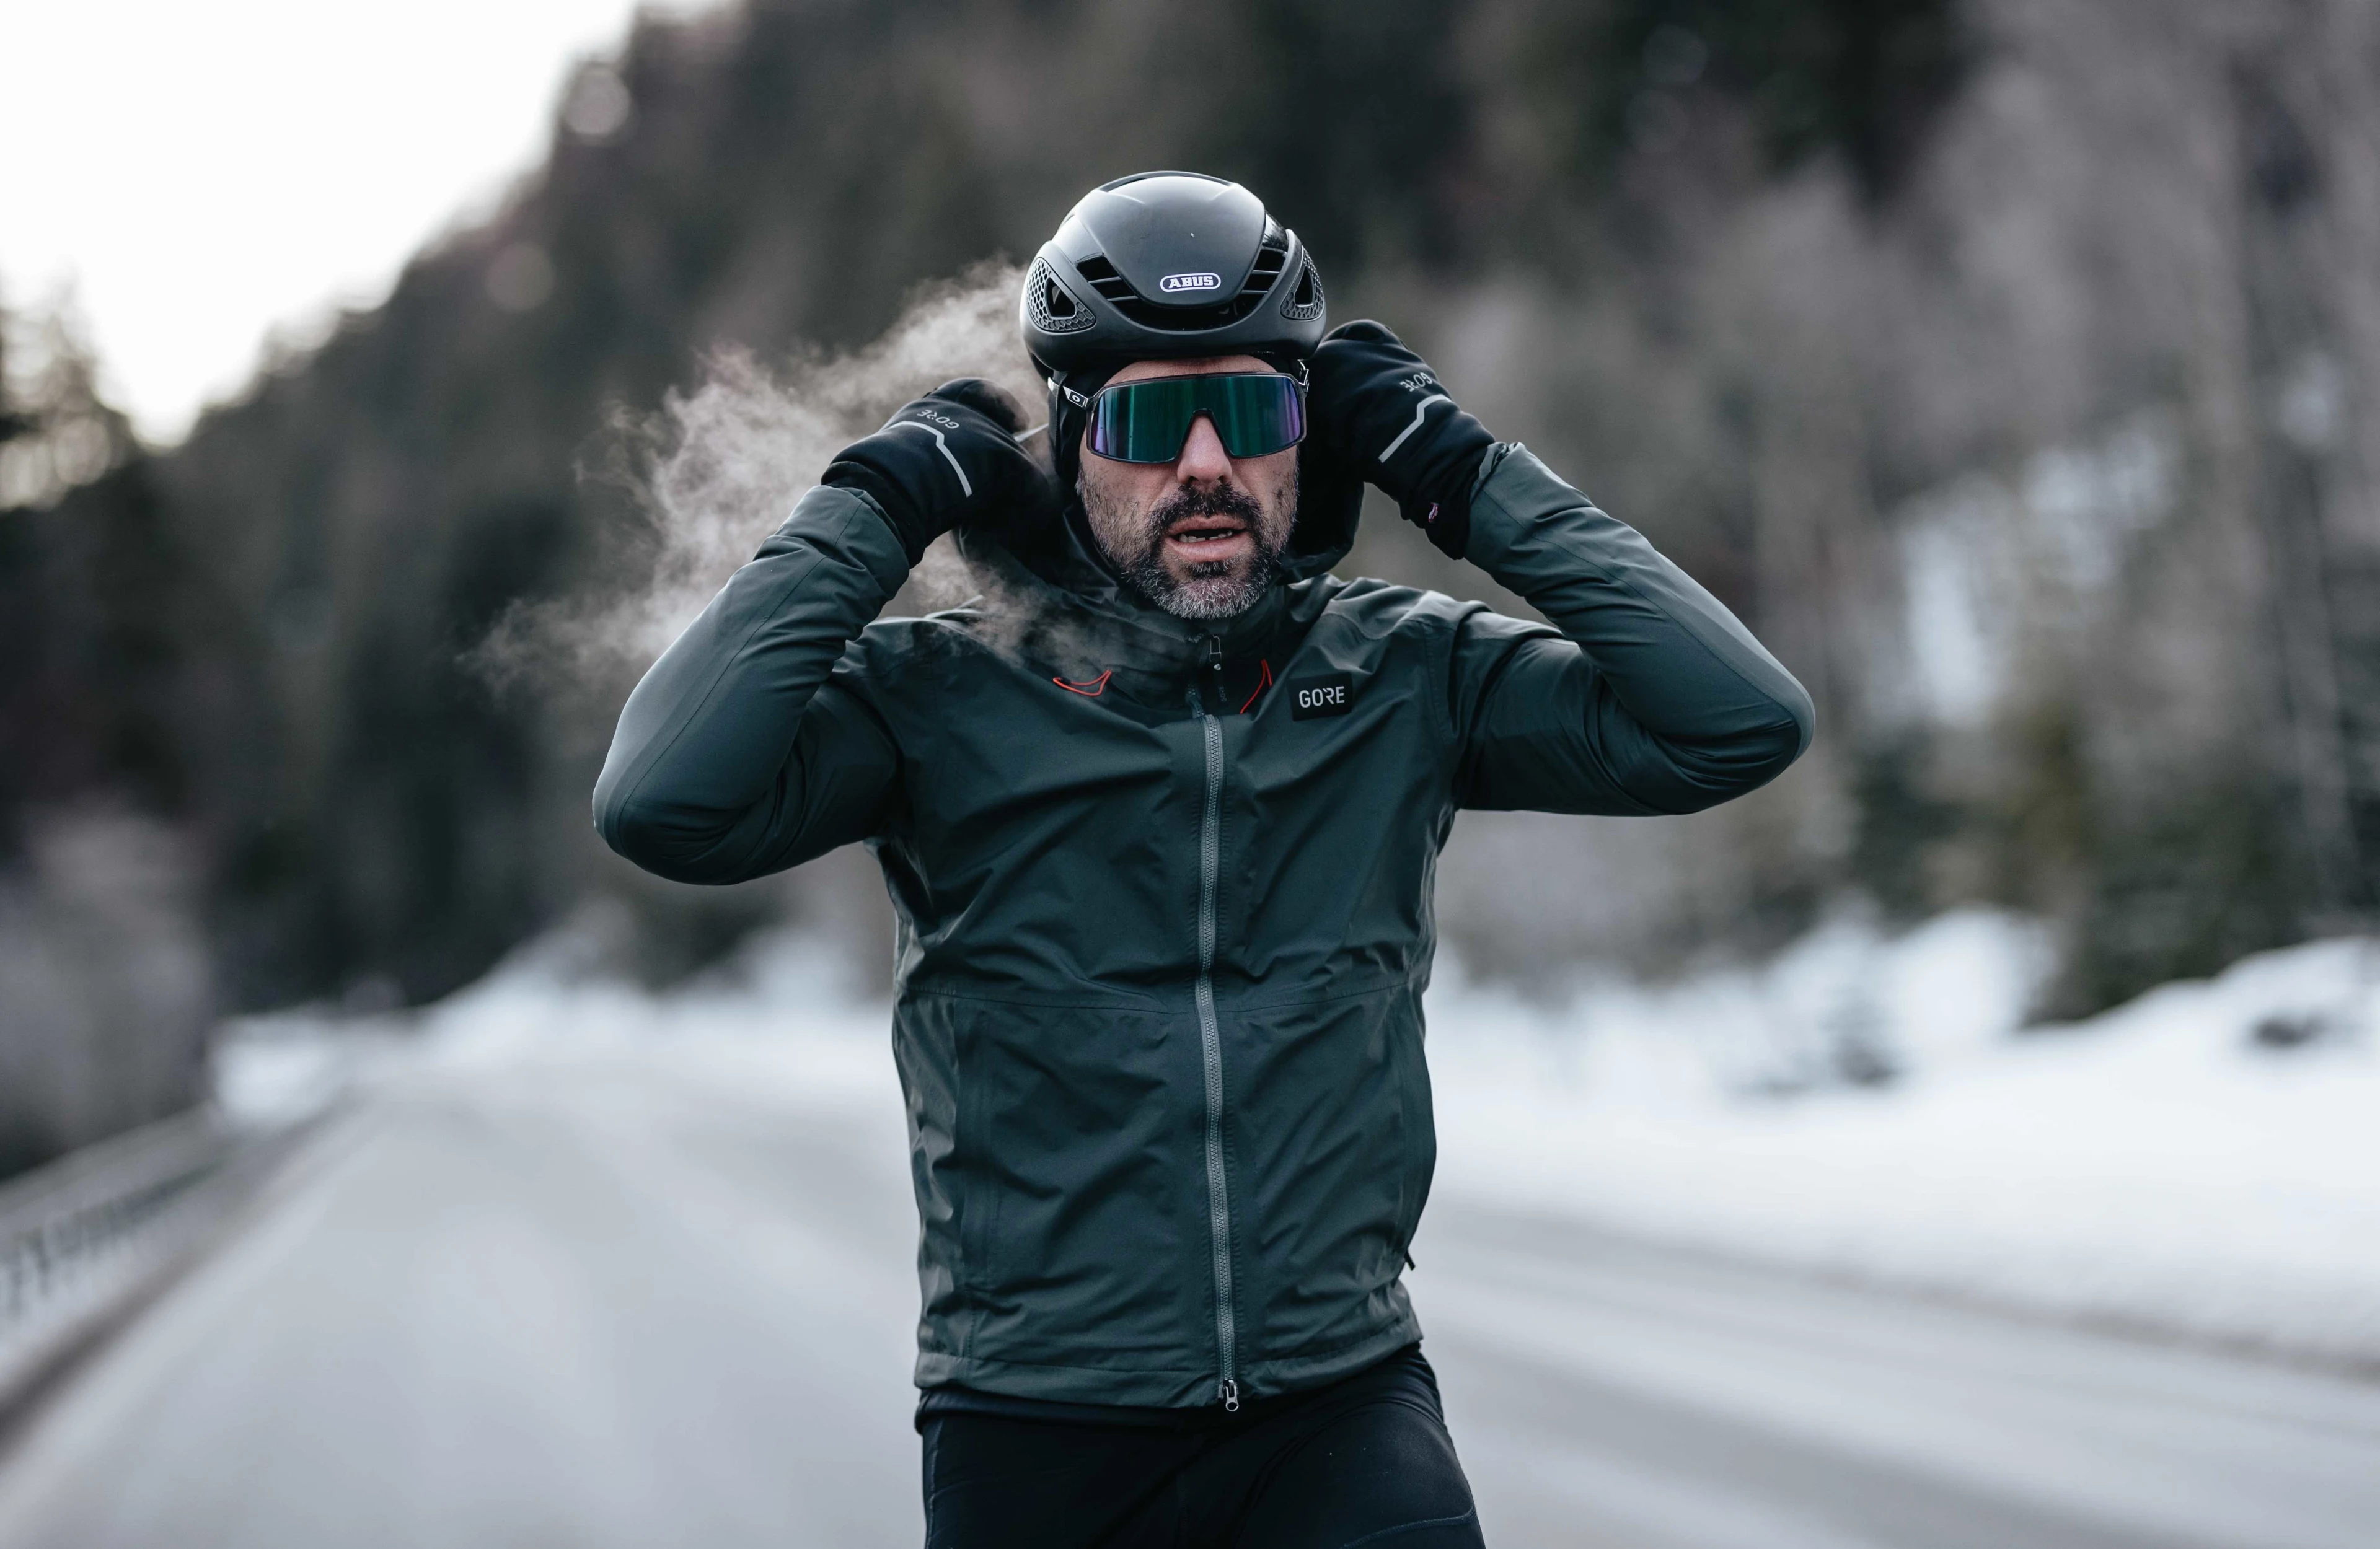 Brace the chill with style and warmth - Cyclop's Winter Collection for  cyclists is here! ❄️🚴‍♂️ Explore our range of gear designed to…